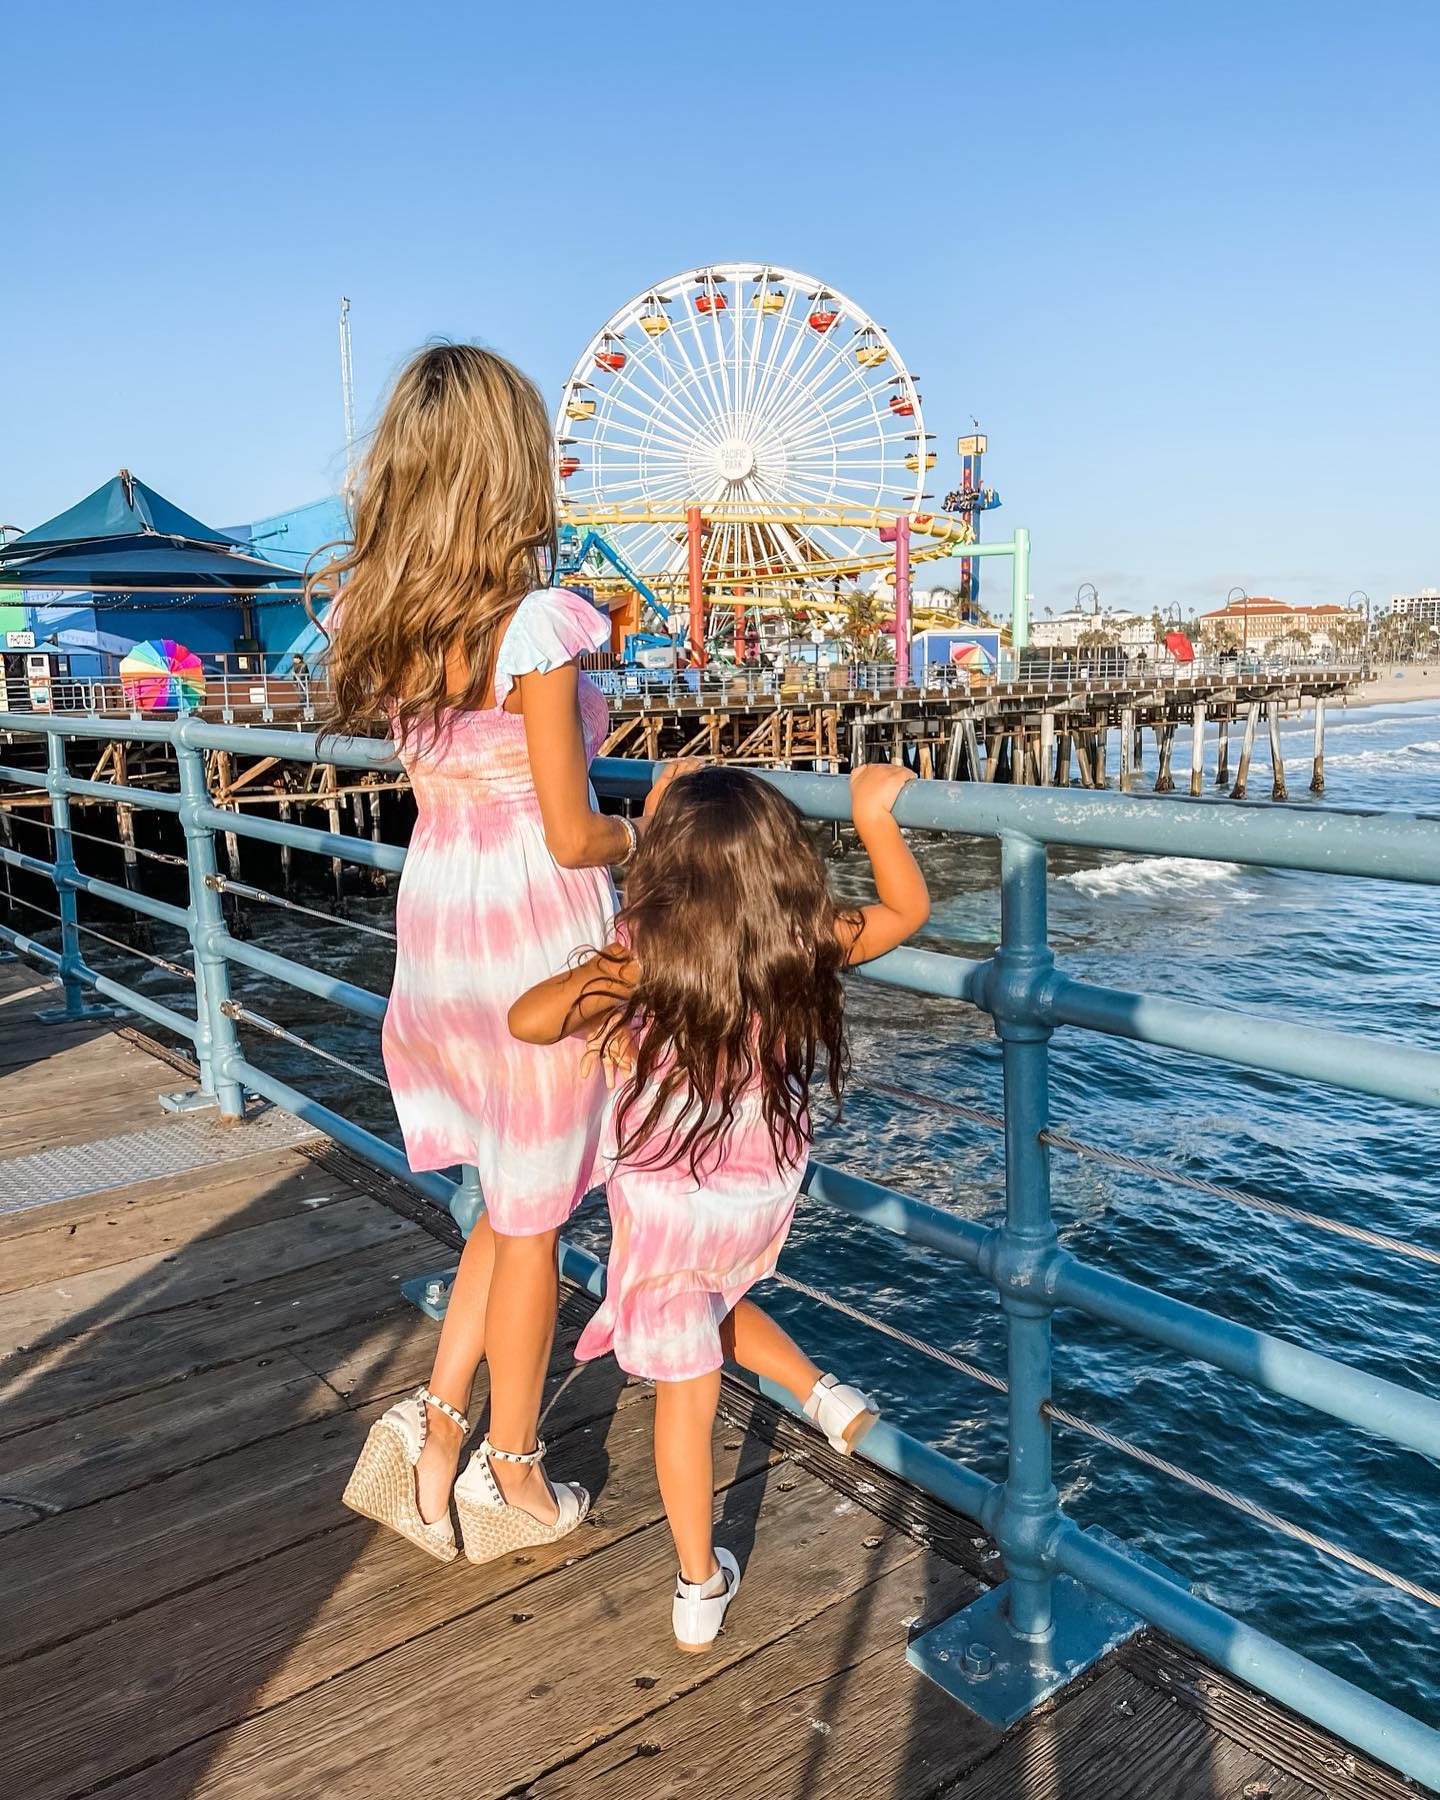 Sunsets on the Santa Monica Pier with your loved ones are simply priceless.. 💖  📸: @thepolymathmom
●
●
●
#santamonicapier #santamonica #pacpark #pacificpark #mothersday